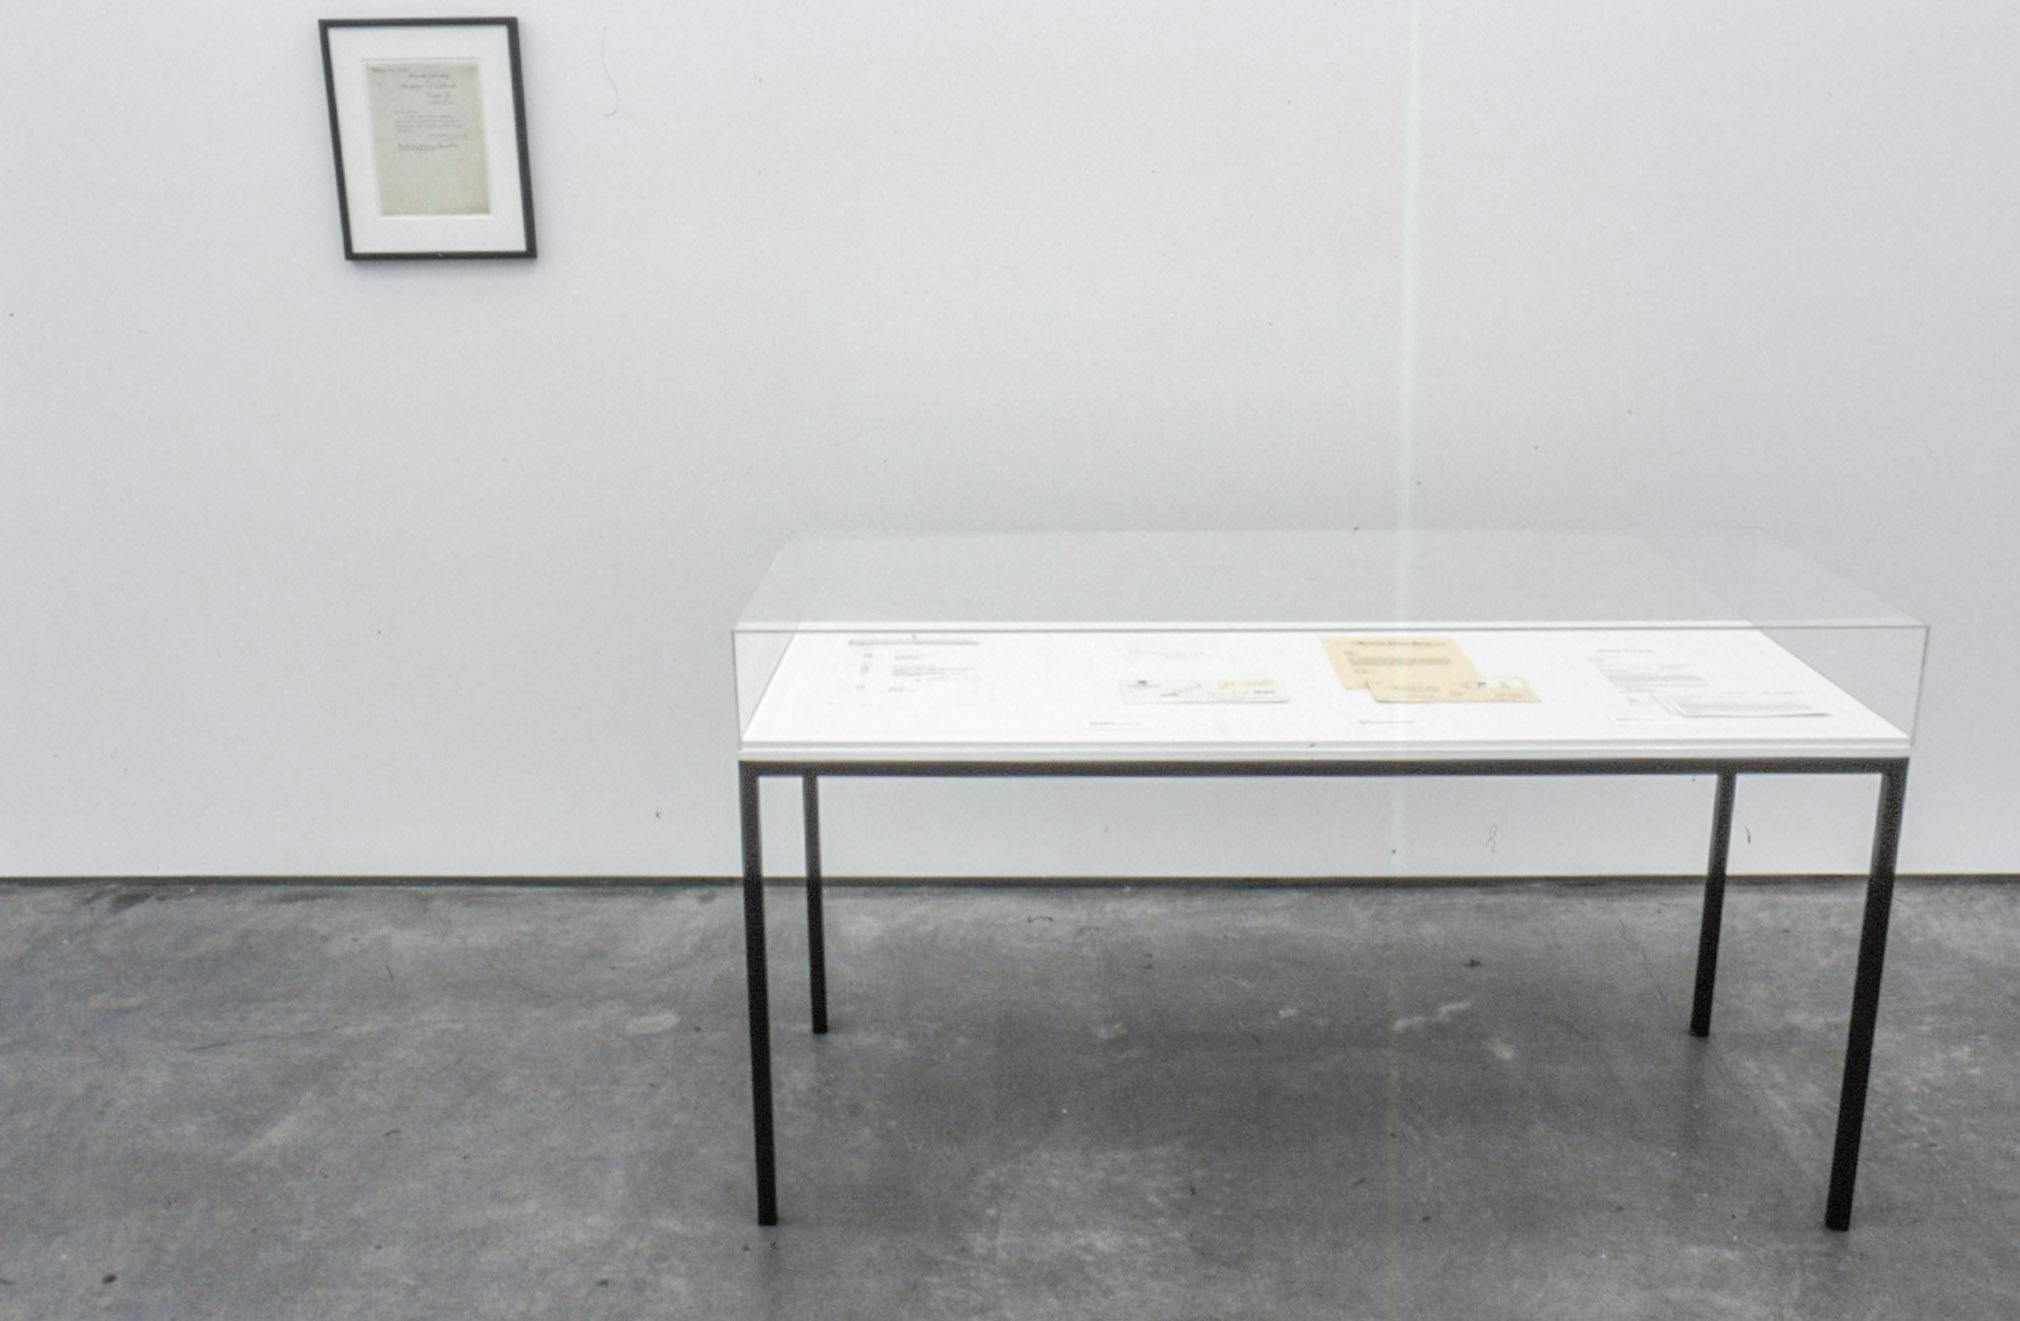 An installation image of Kirsten Pieroth’s art exhibition. Various pieces of paper with texts printed on them are placed in a display case. Another document is framed and mounted on the wall above the display case. 